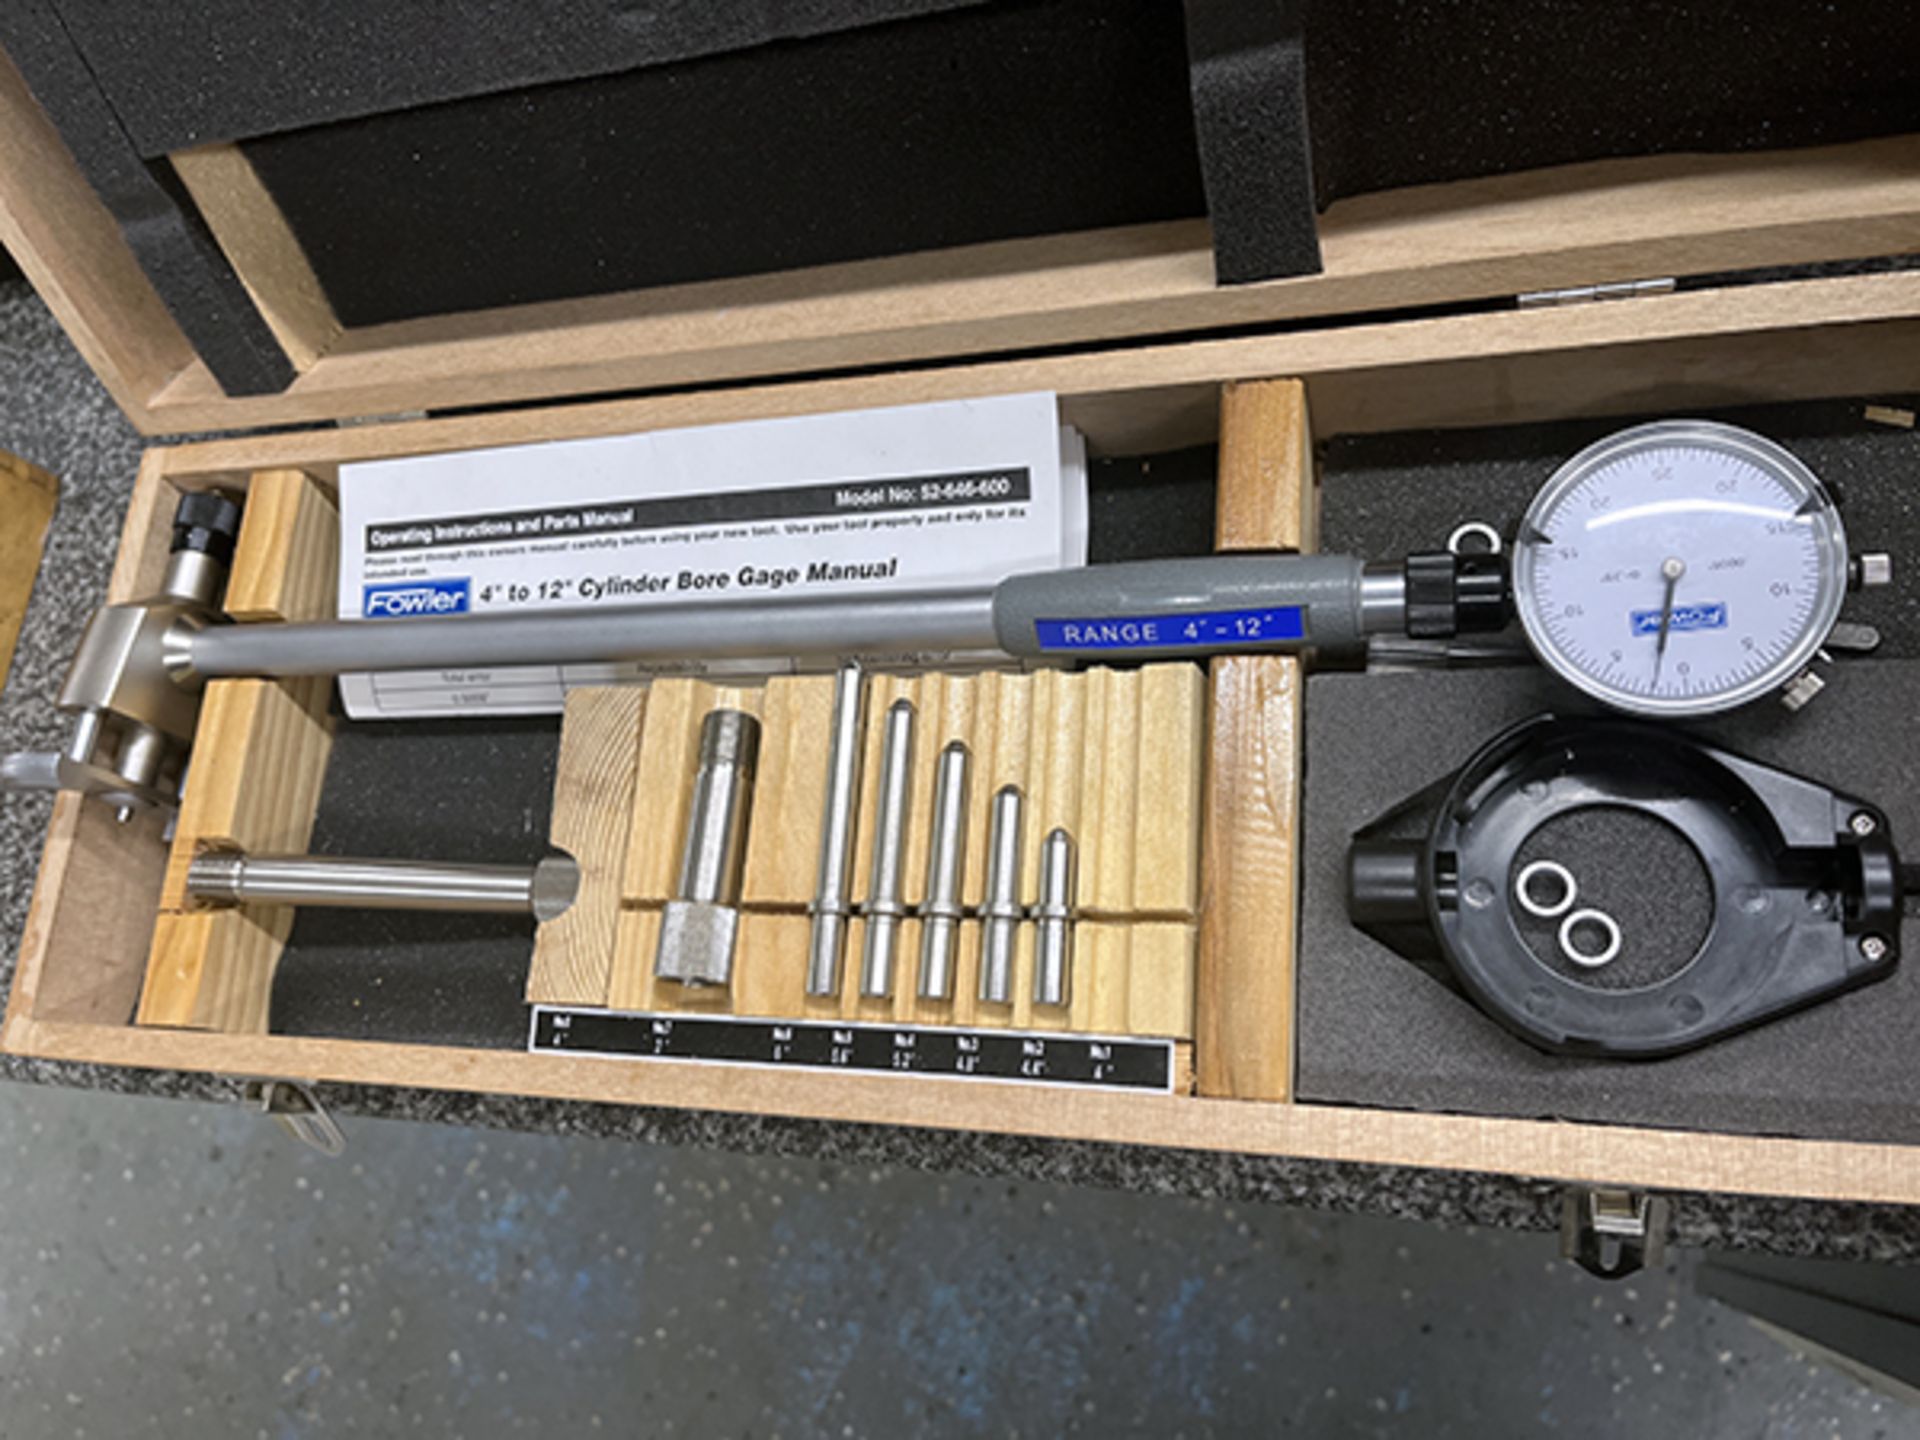 4-12" Fowler Bore Gage Set - Image 5 of 7